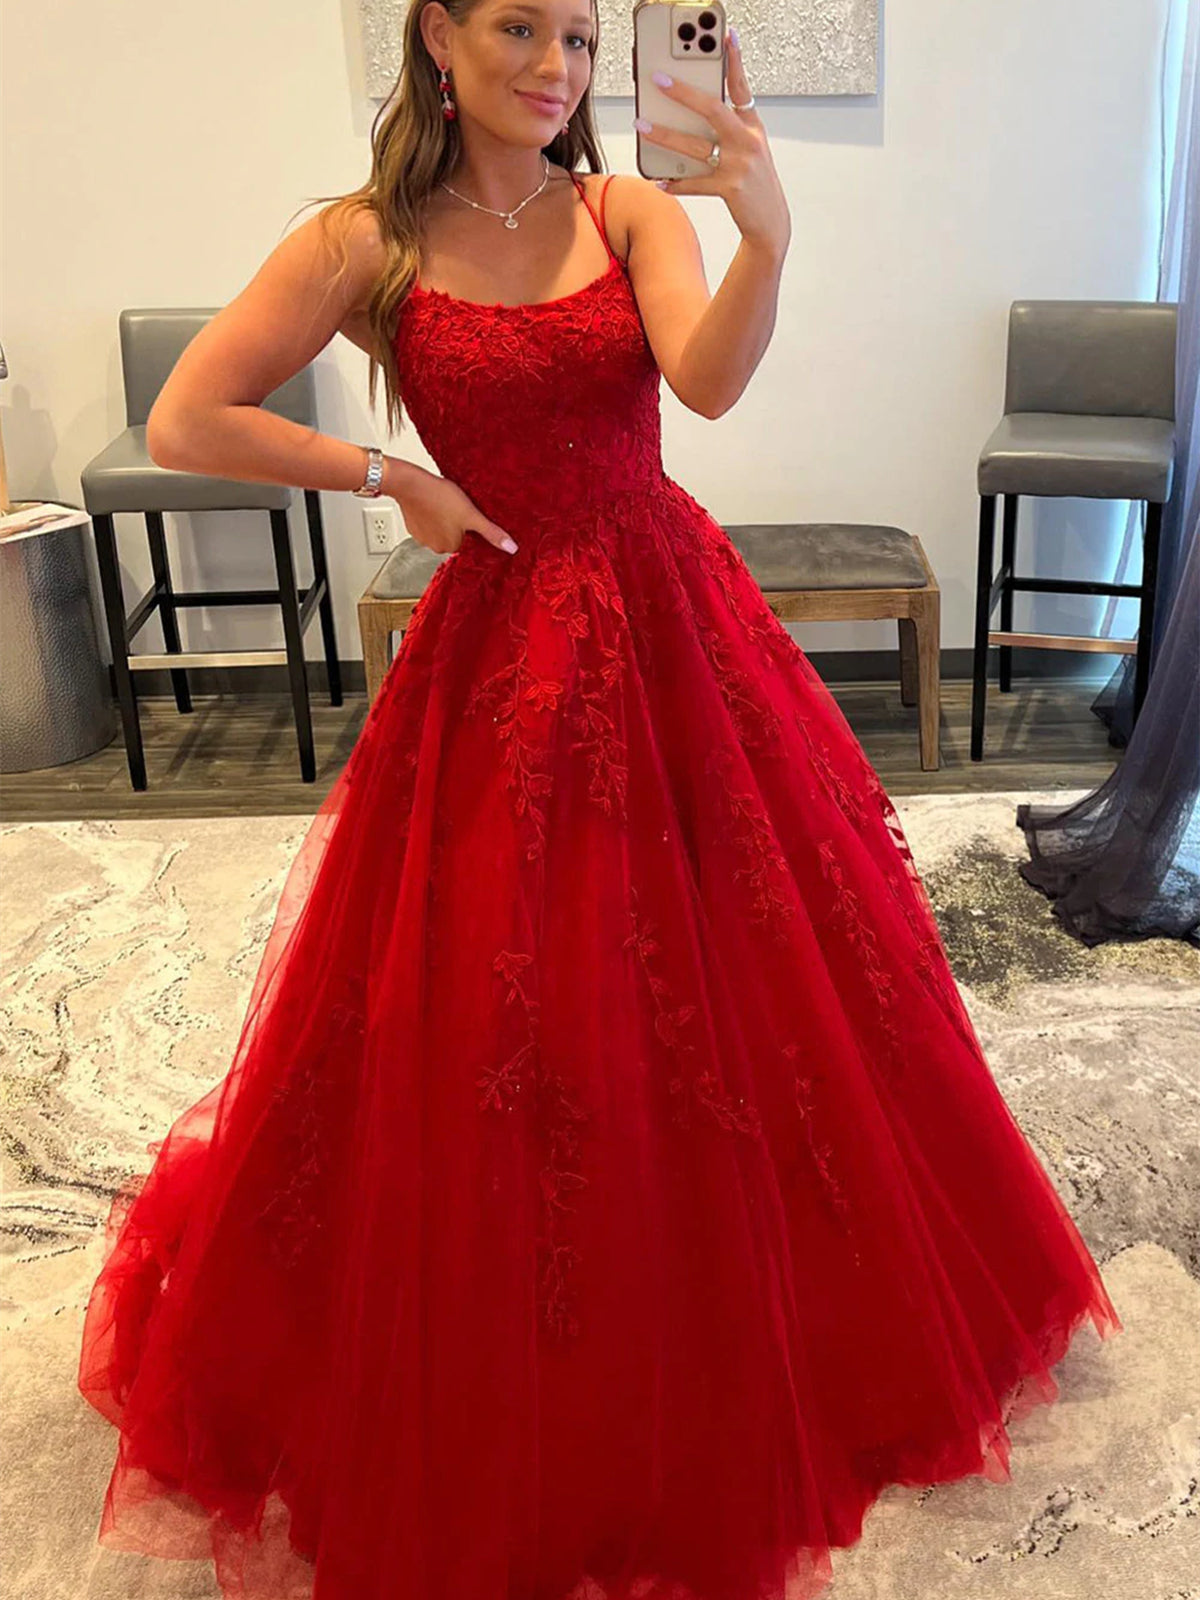 Tulle Ruffles Off Shoulder Ball Gown Dresses Removable Sleeves | Tulle ball  gown, Ball gowns, Ball gowns prom